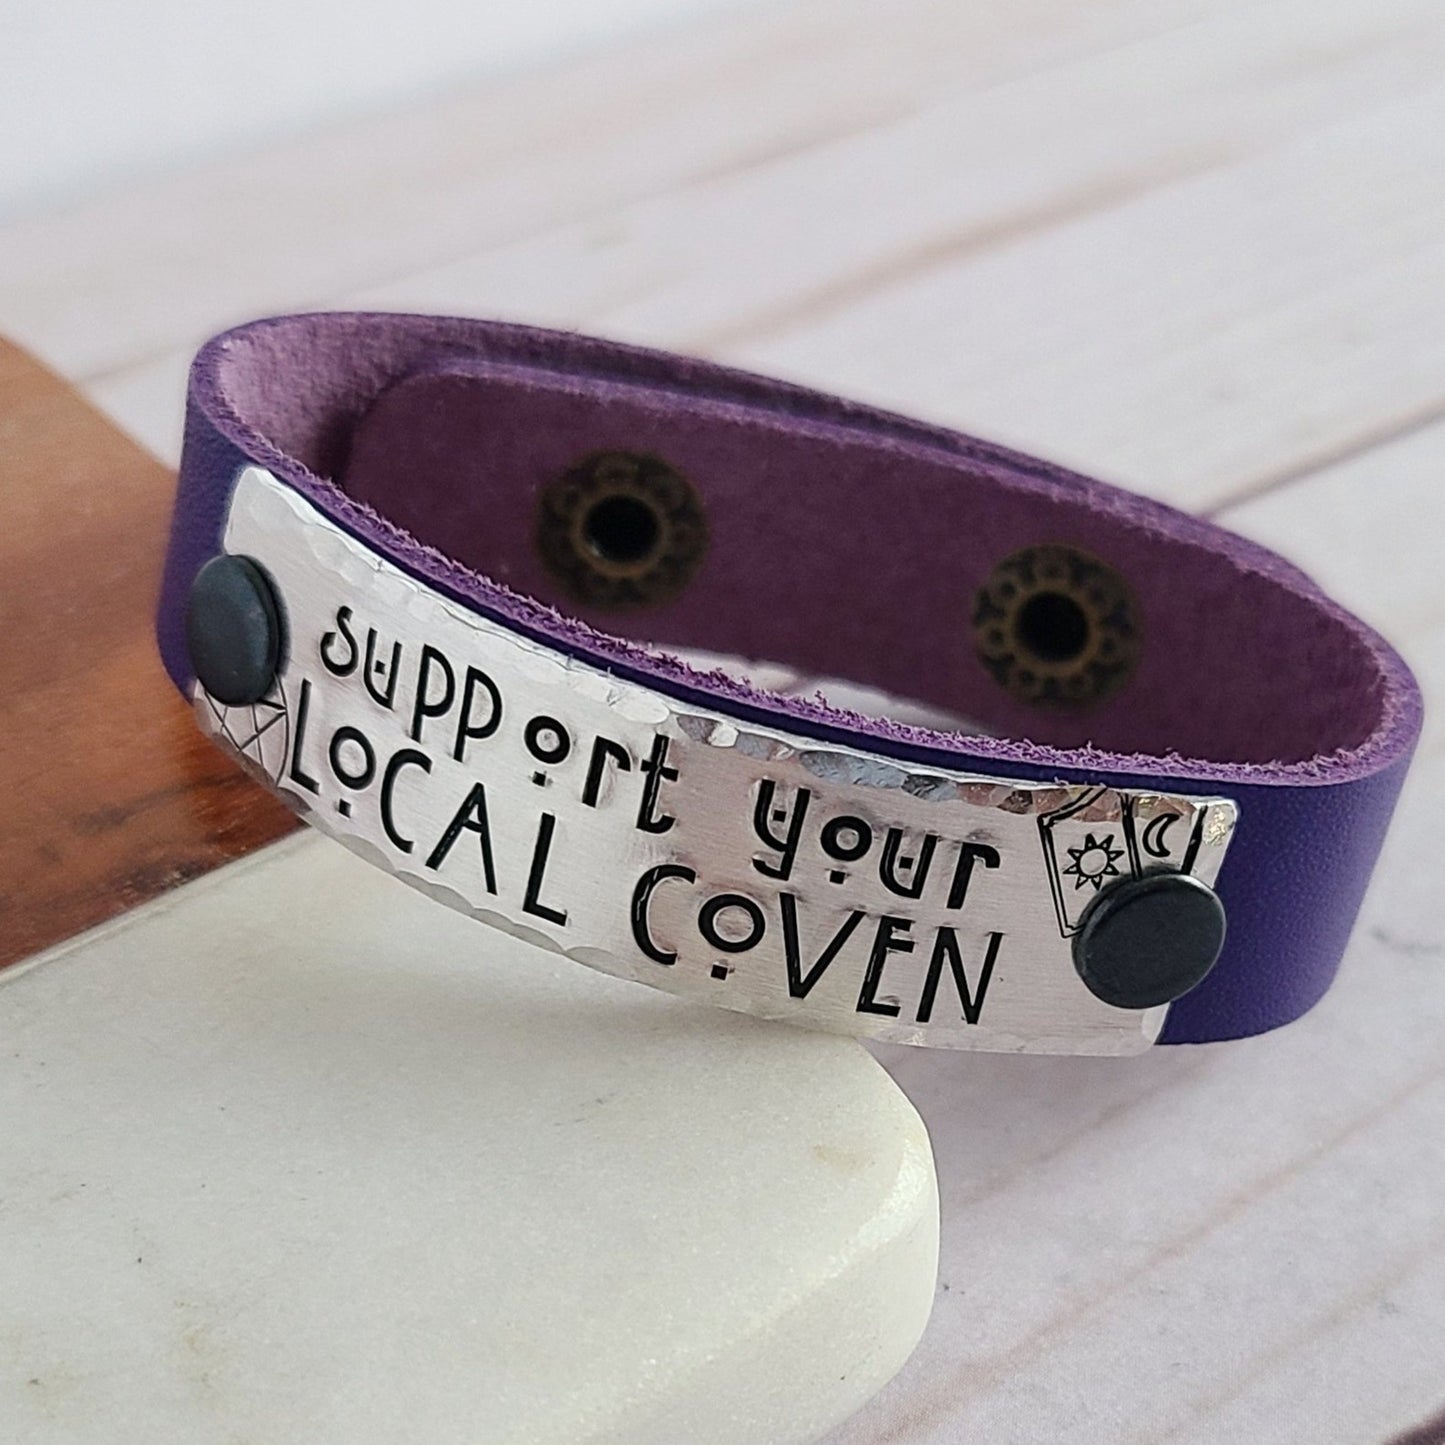 Purple leather cuff bracelet with a metal tag that is hand stamped with Support Your Local Coven